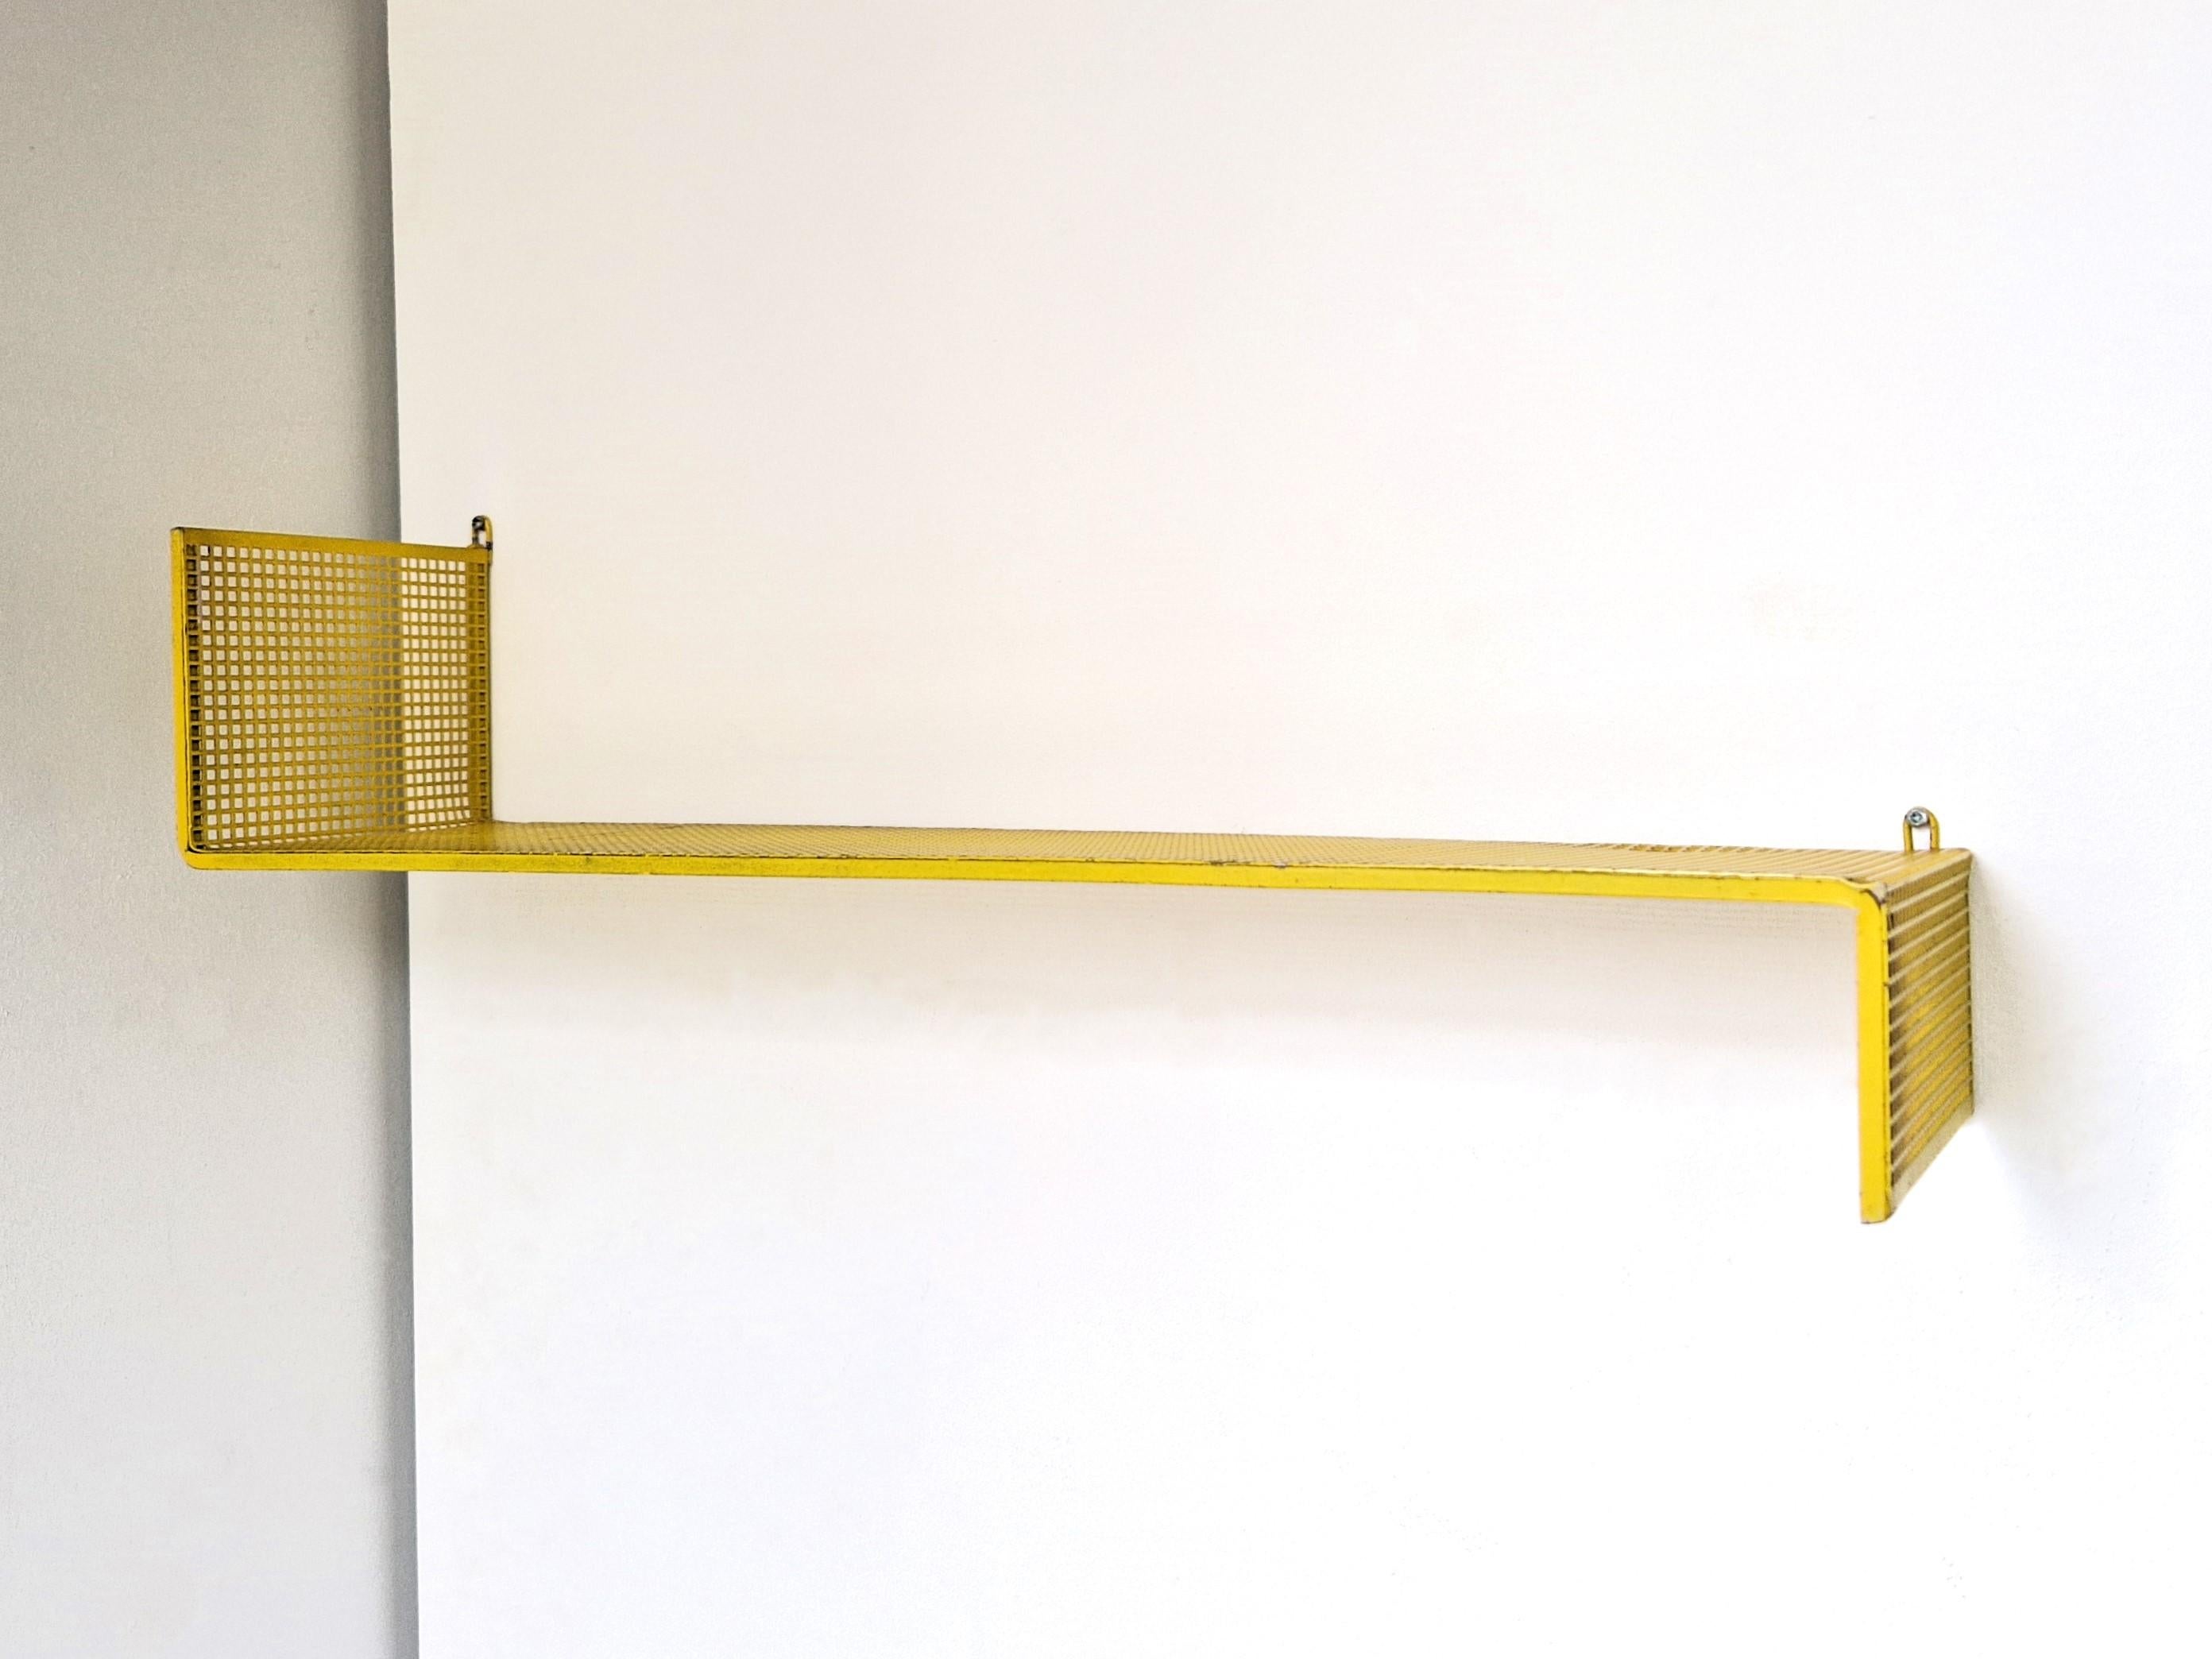 This amazing and rare wall shelf was designed by Mathieu Matégot for Artimeta in the 1950's. It is made out of yellow lacquered perforated metal.  The shelf is in a good original condition and it has a beautiful patina of age and use. This is a